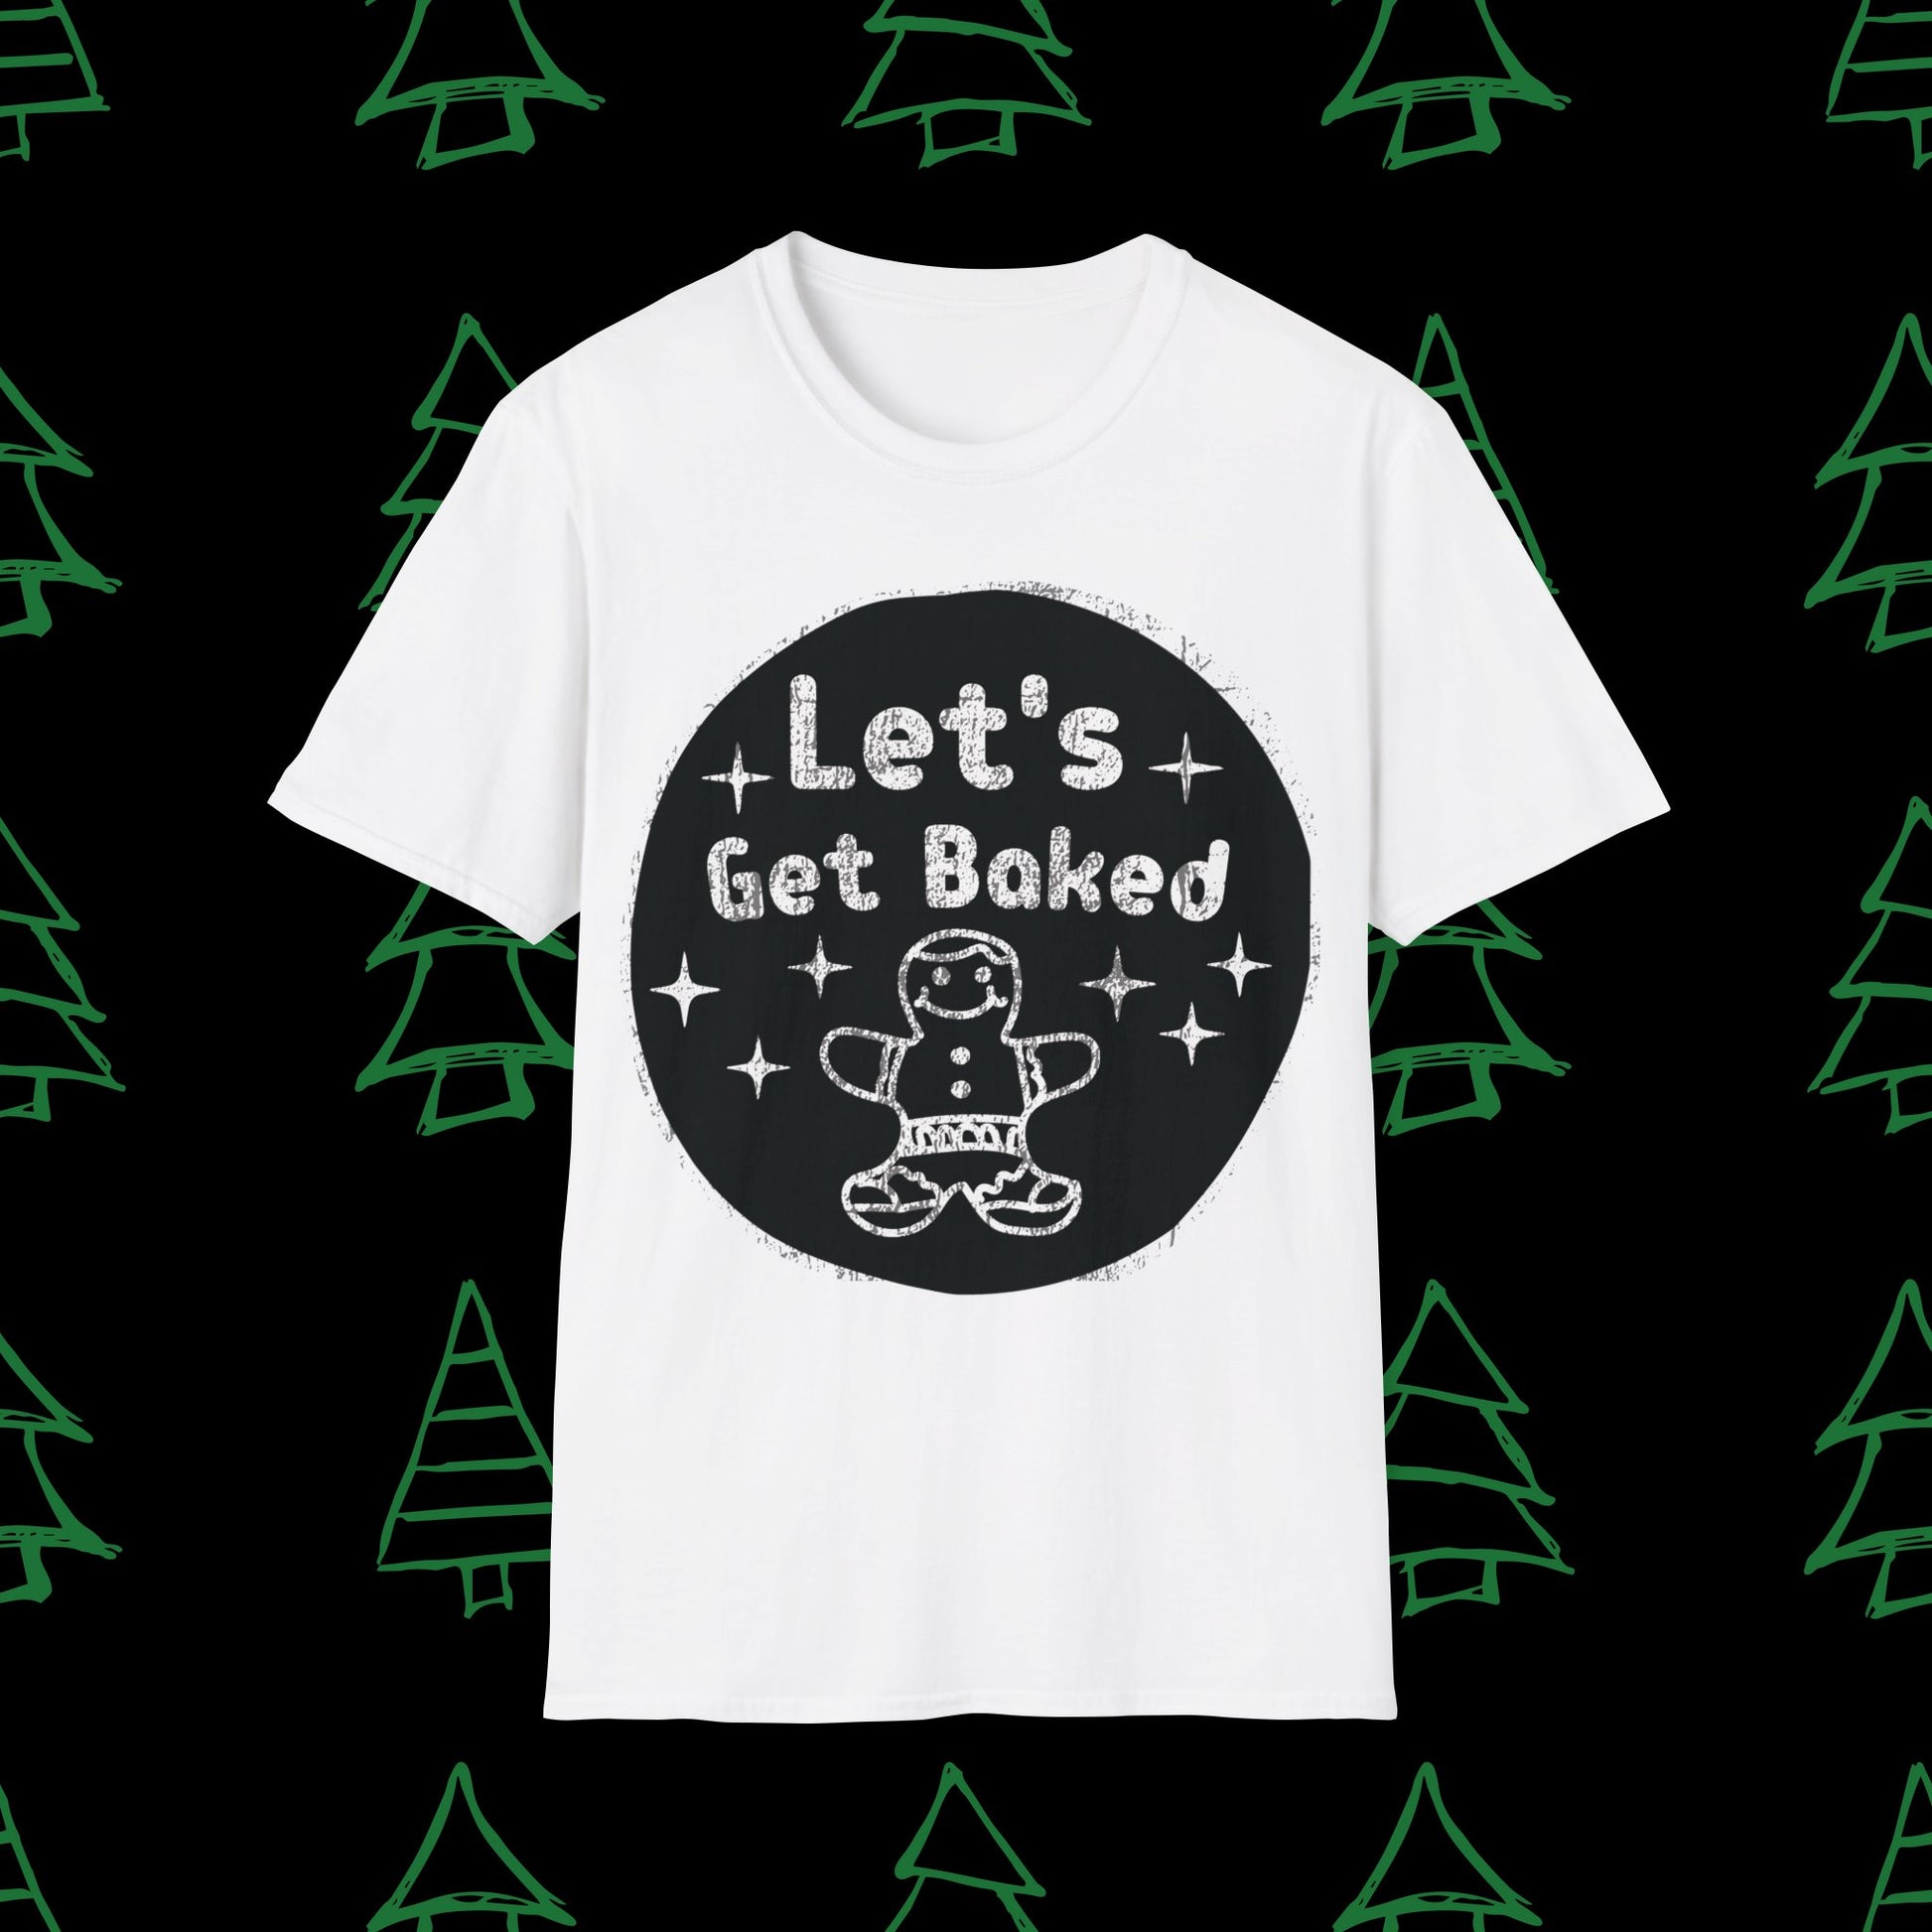 Christmas T-Shirt - Let's Get Baked - Mens Christmas Shirts - Adult Christmas TShirts T-Shirts Graphic Avenue White Adult Small 